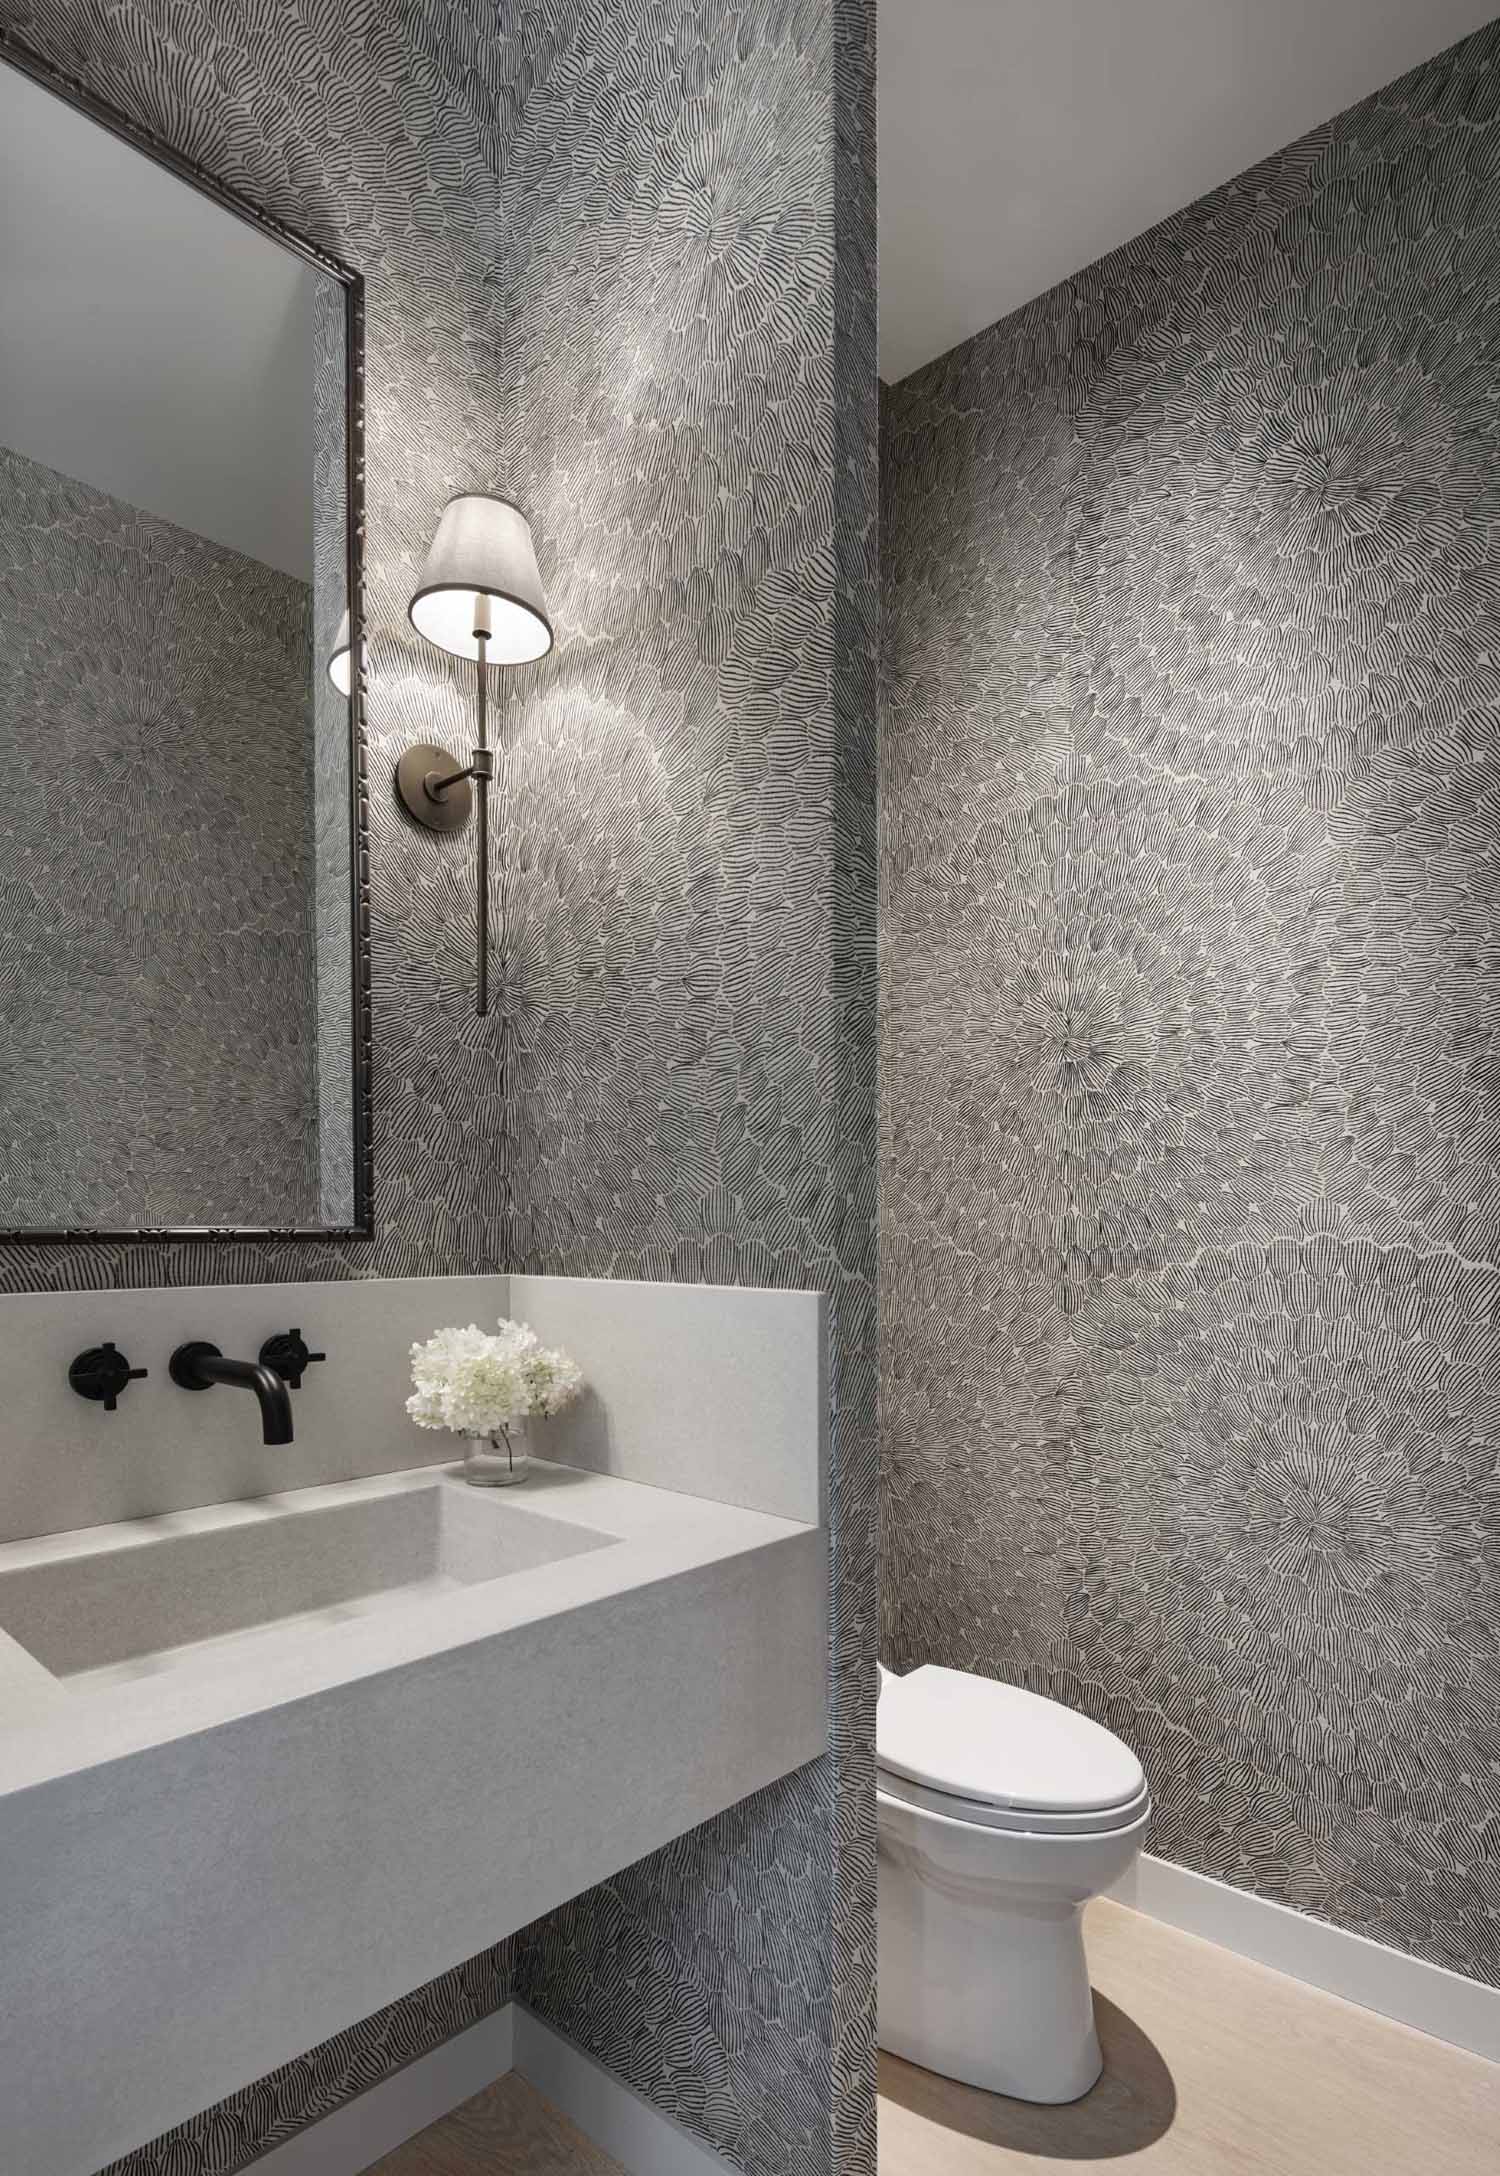 A black and white patterned wallpaper covers the walls of this powder room.